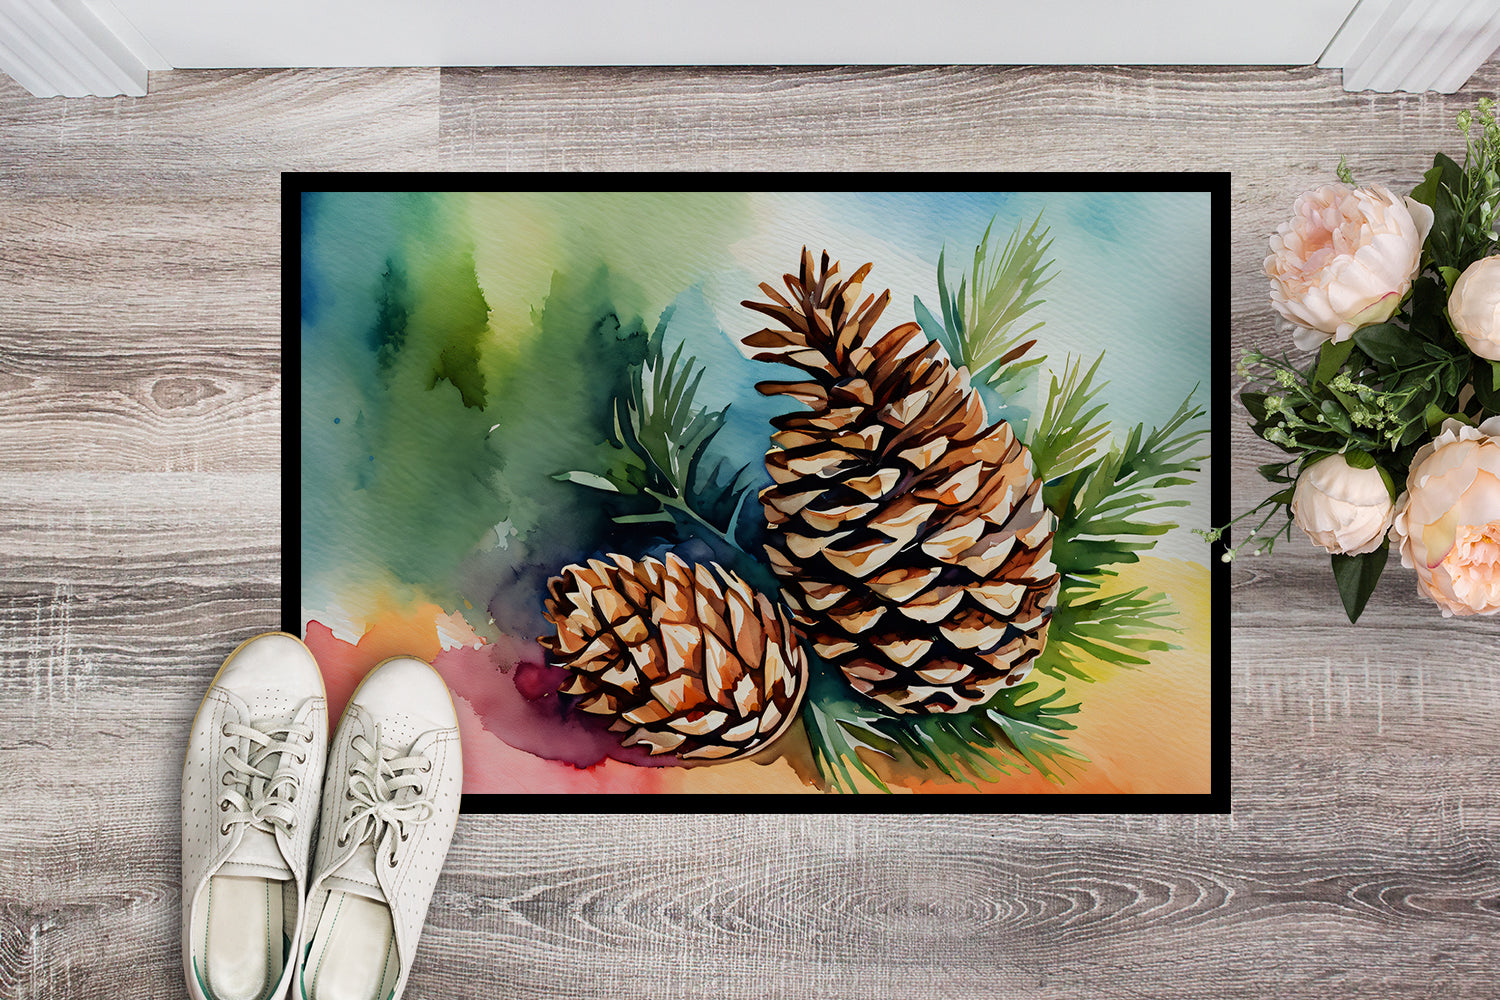 Maine White Pine Cone and Tassels in Watercolor Doormat 18x27